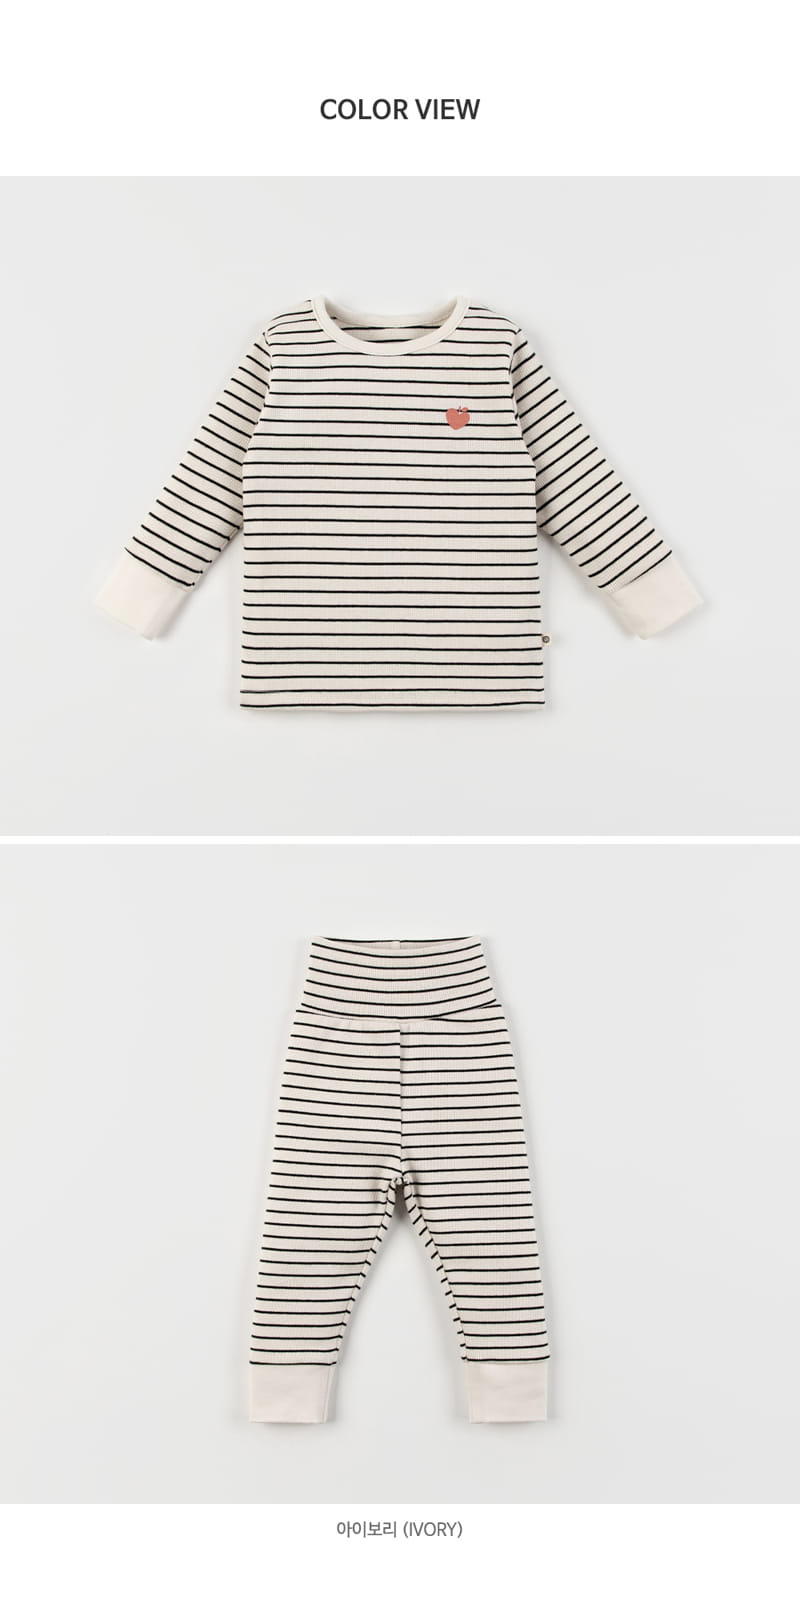 Kids Clara - Korean Baby Fashion - #babyfever - Ylang Compy Belly Baby Easy Wear - 8